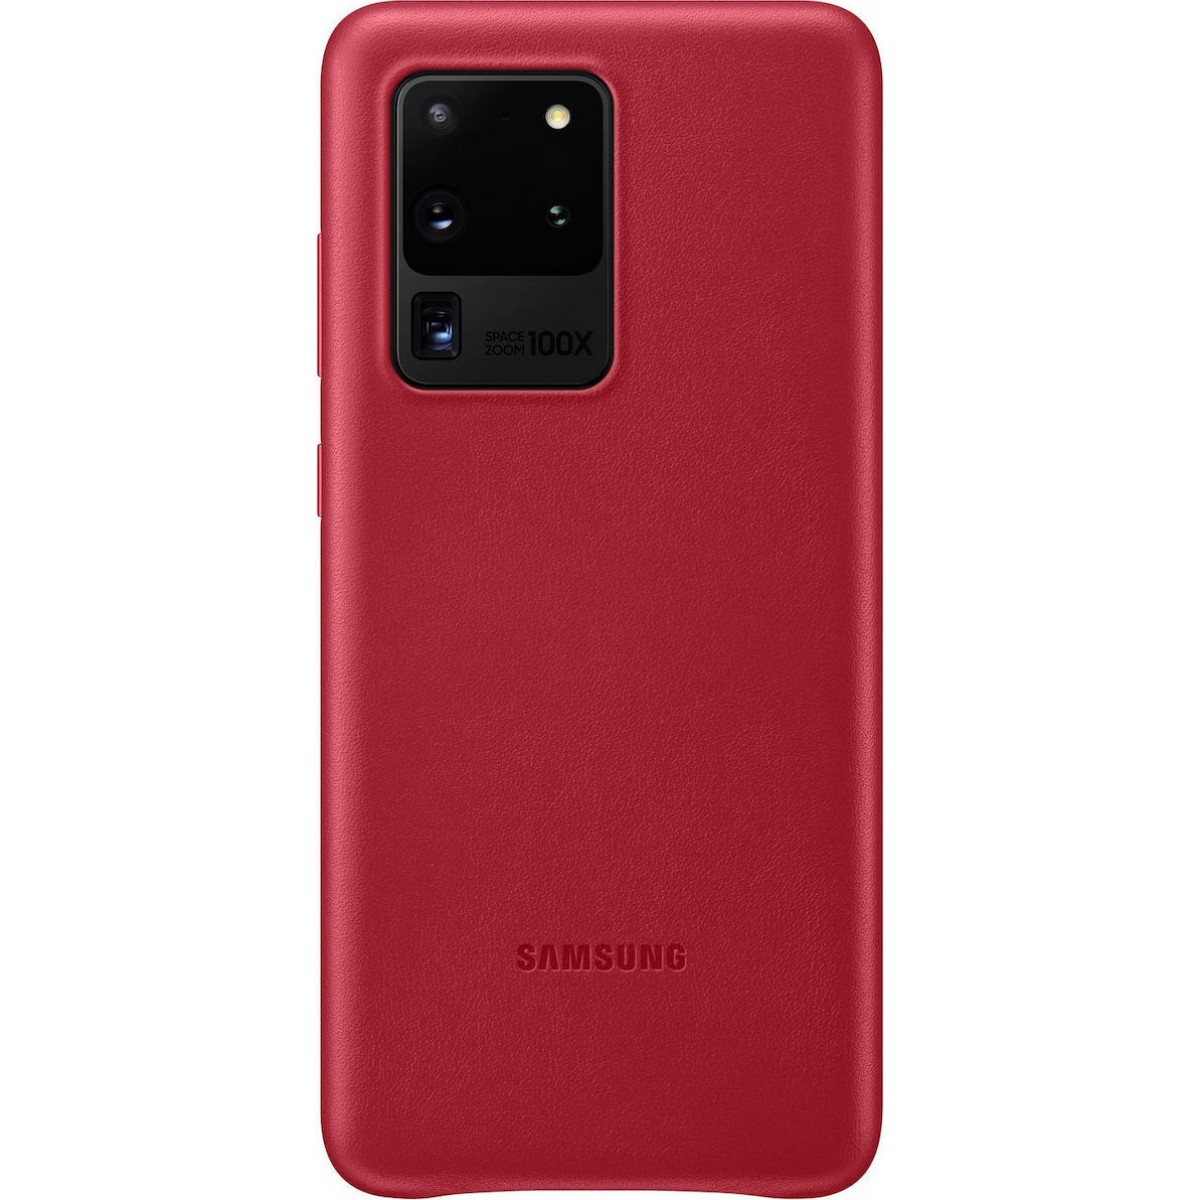 Samsung Leather Cover Galaxy S20 Ultra_SM-G988, red